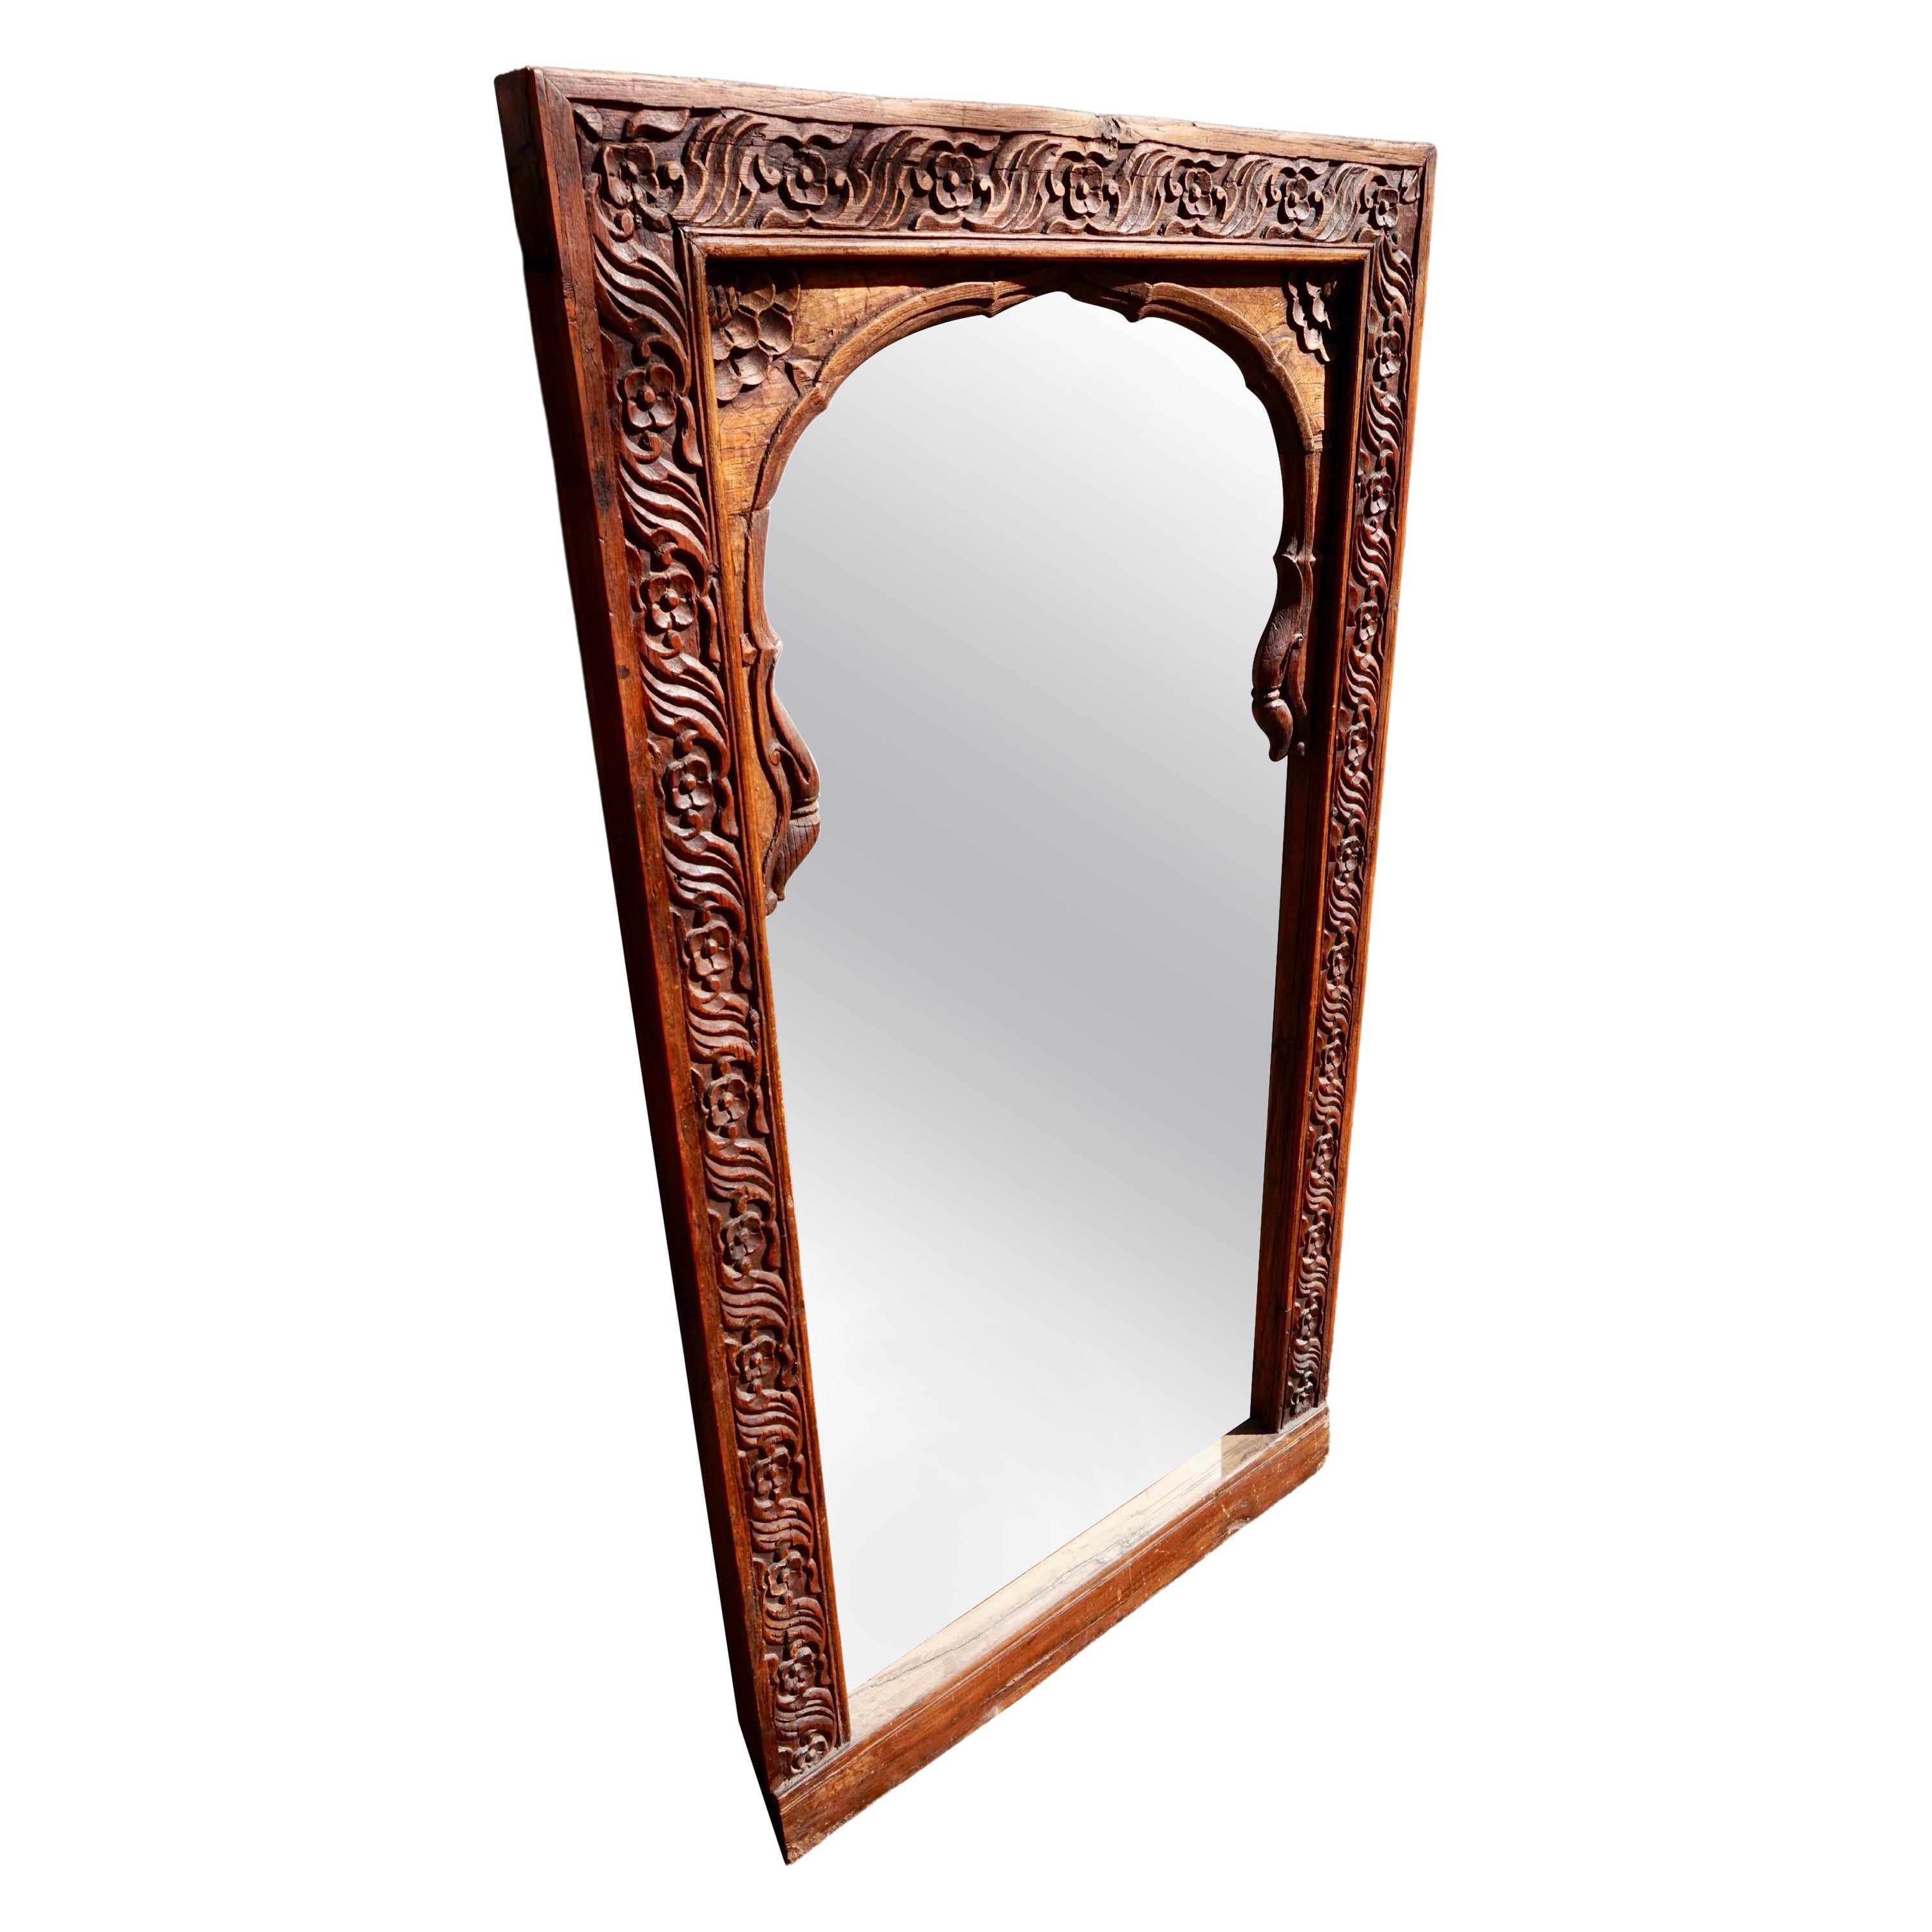 What do Victorian mirrors look like?